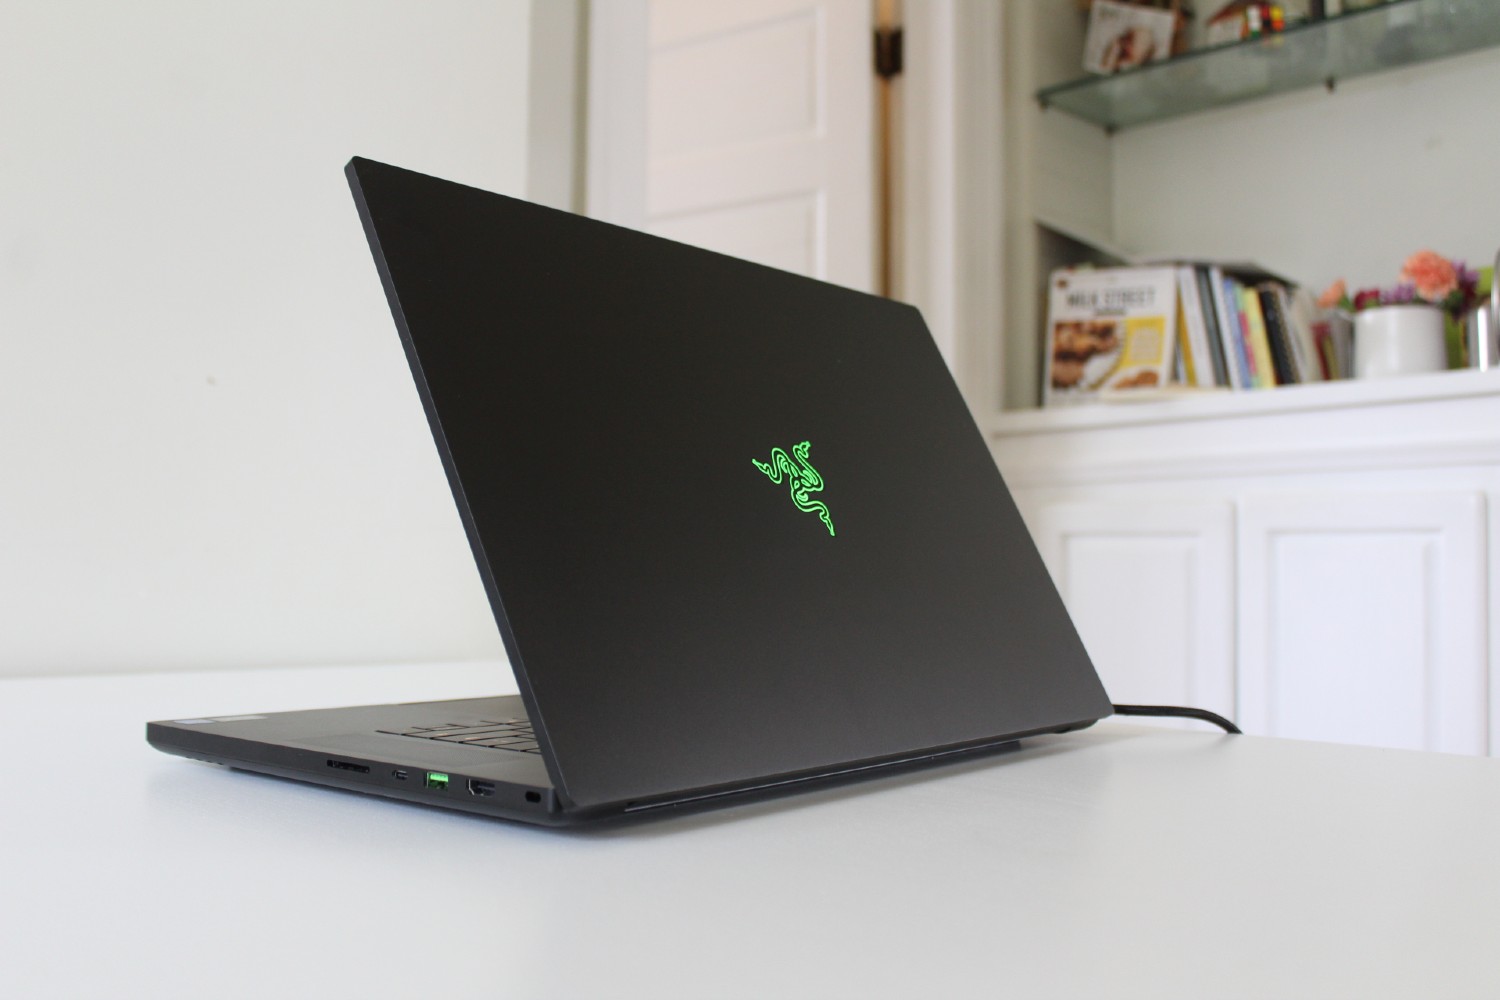 Razer Blade 14 Review: AMD Finally Makes the Cut